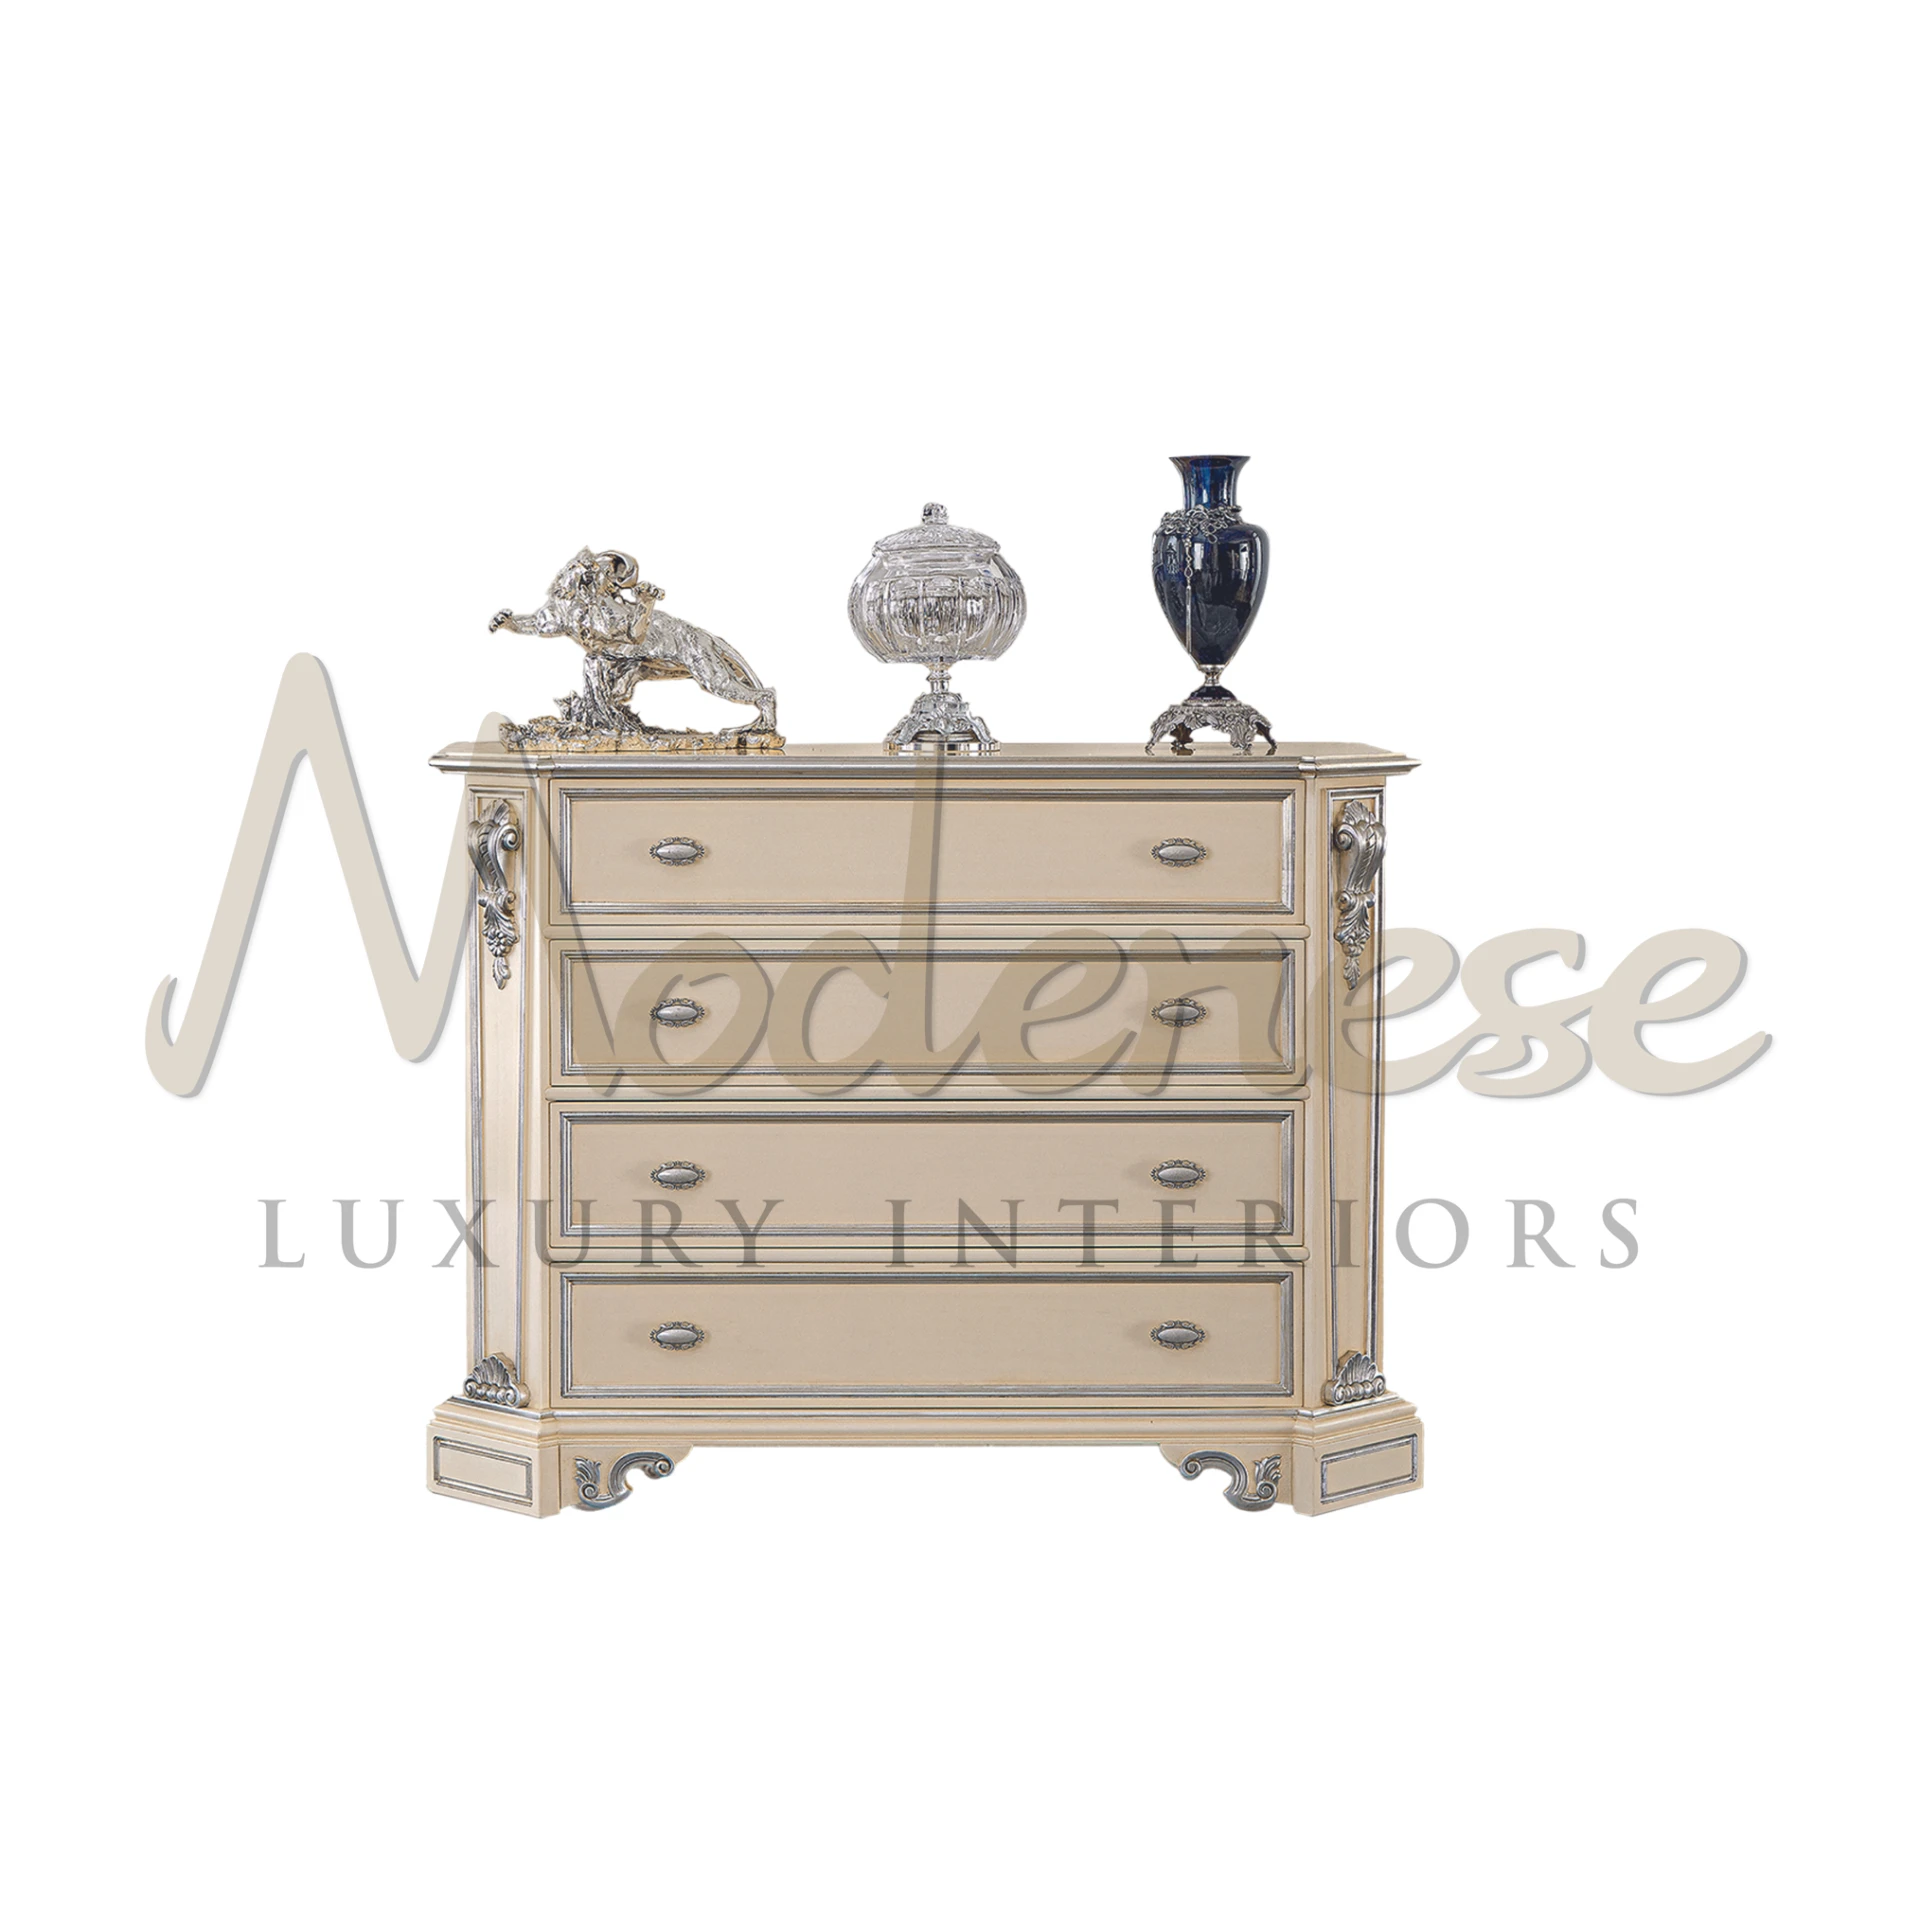 Classic Design Chest of Drawers: A timeless storage solution blending elegance and functionality. Organize with style.